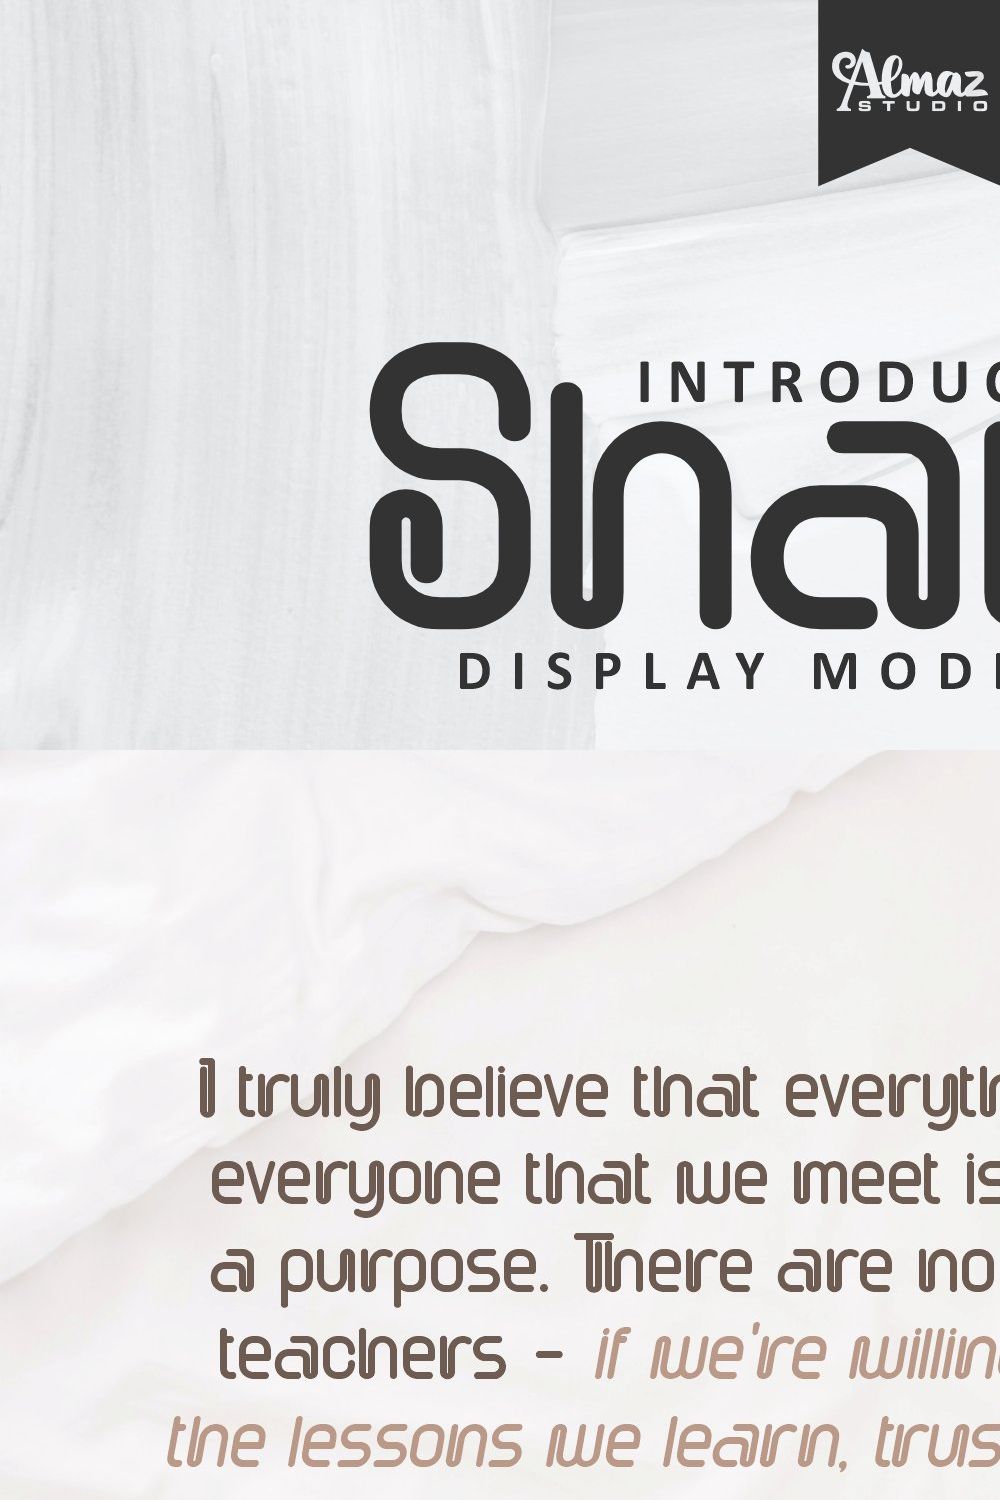 Shania pinterest preview image.